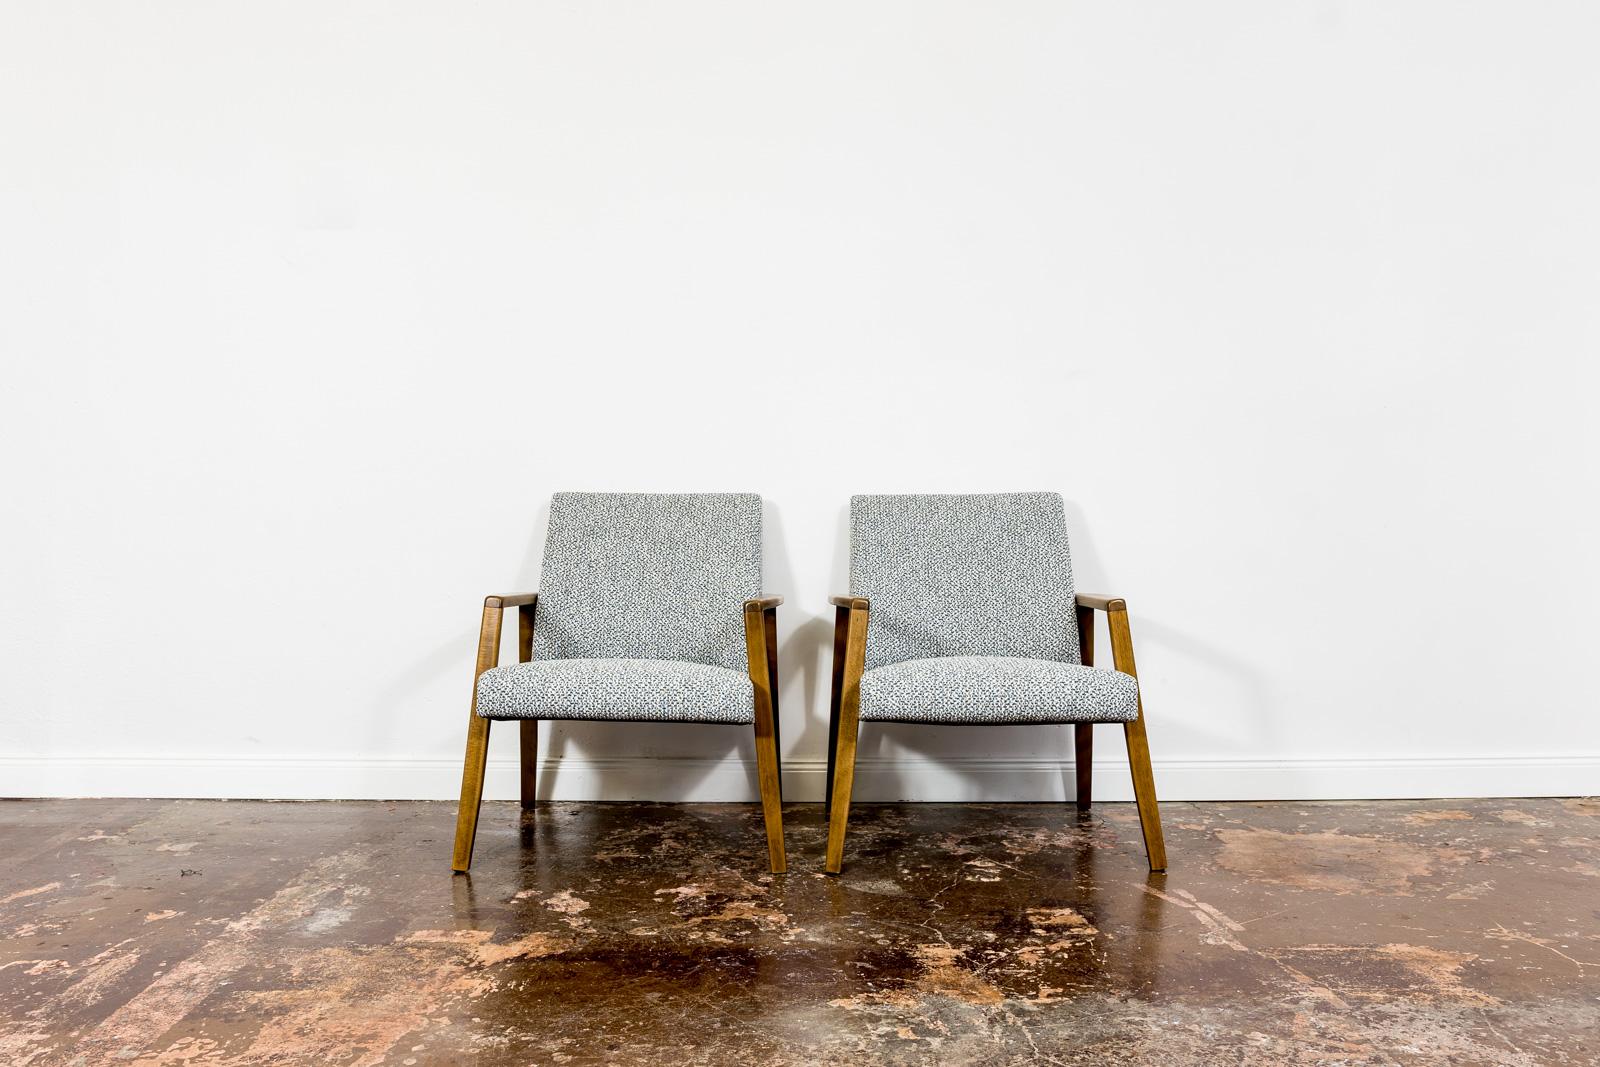 Pair of Mid-Century armchairs, 1960s, Germany.
Completely restored.